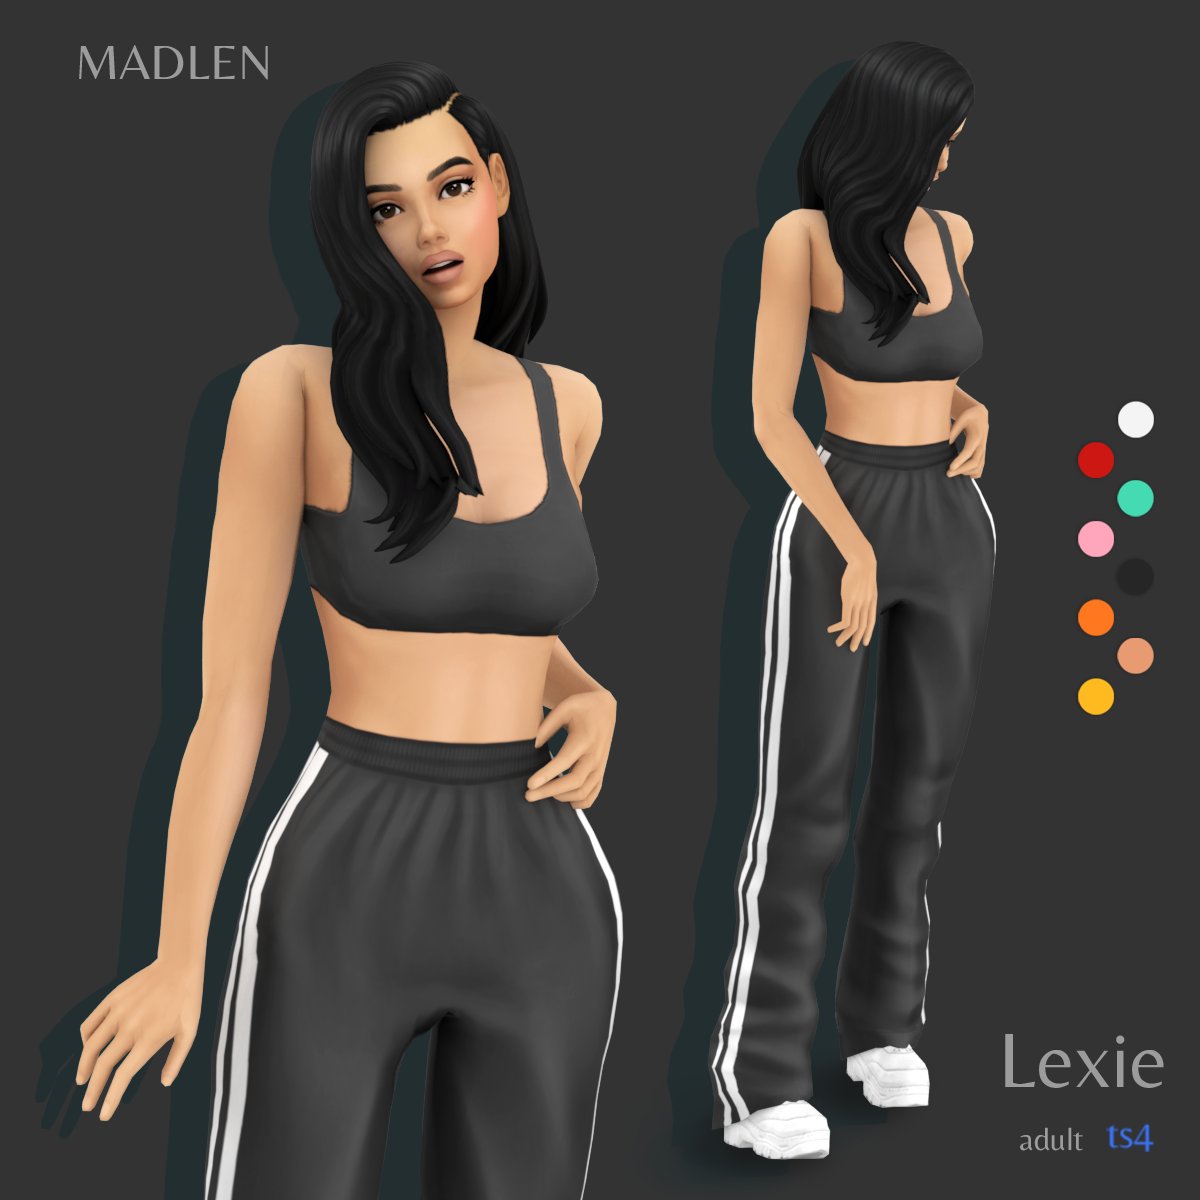 Madlen On Twitter Lexie Outfit Ynbmg4p16v